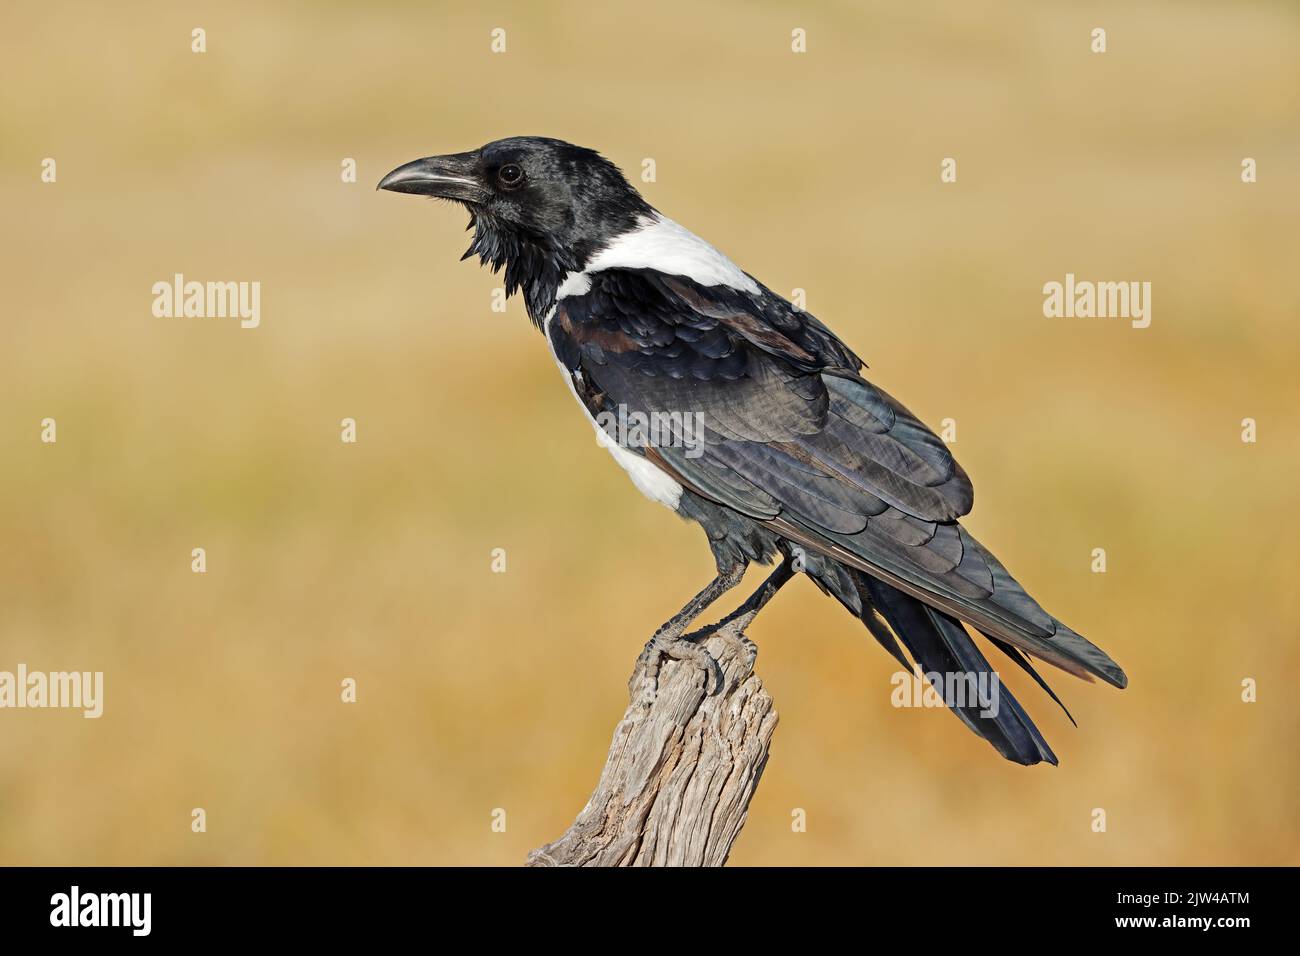 A pied crow (Corvus albus) perched on a branch, Etosha National Park, Namibia Stock Photo